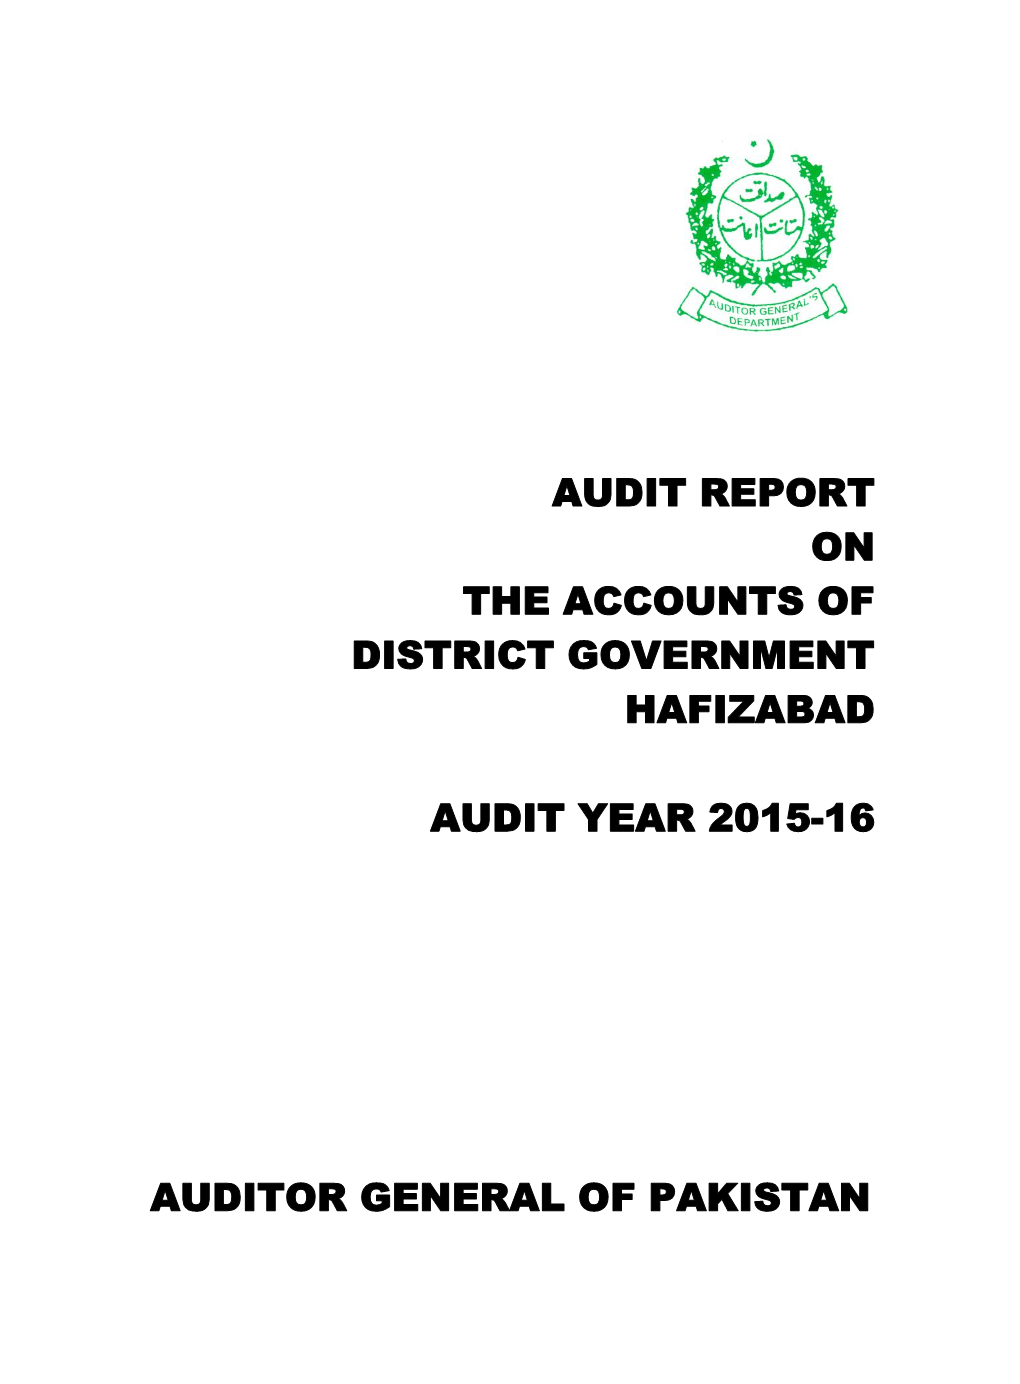 Audit Report on the Accounts of District Government Hafizabad Audit Year